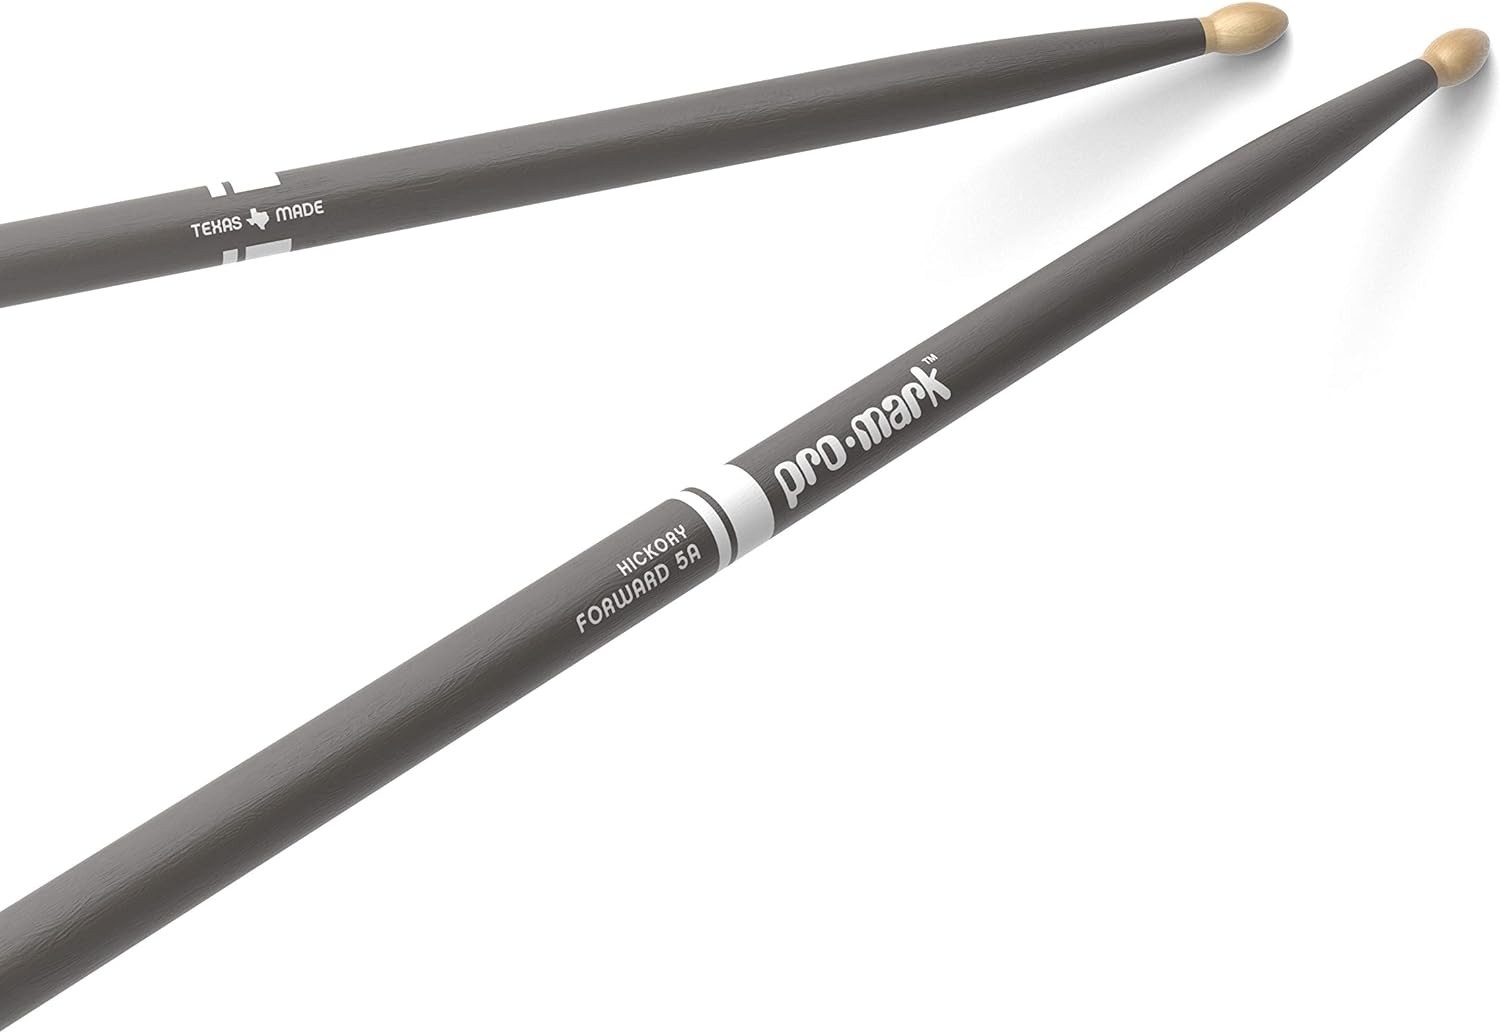 Promark American Hickory Classic 5A Drumsticks, Acorn Tip, Gray